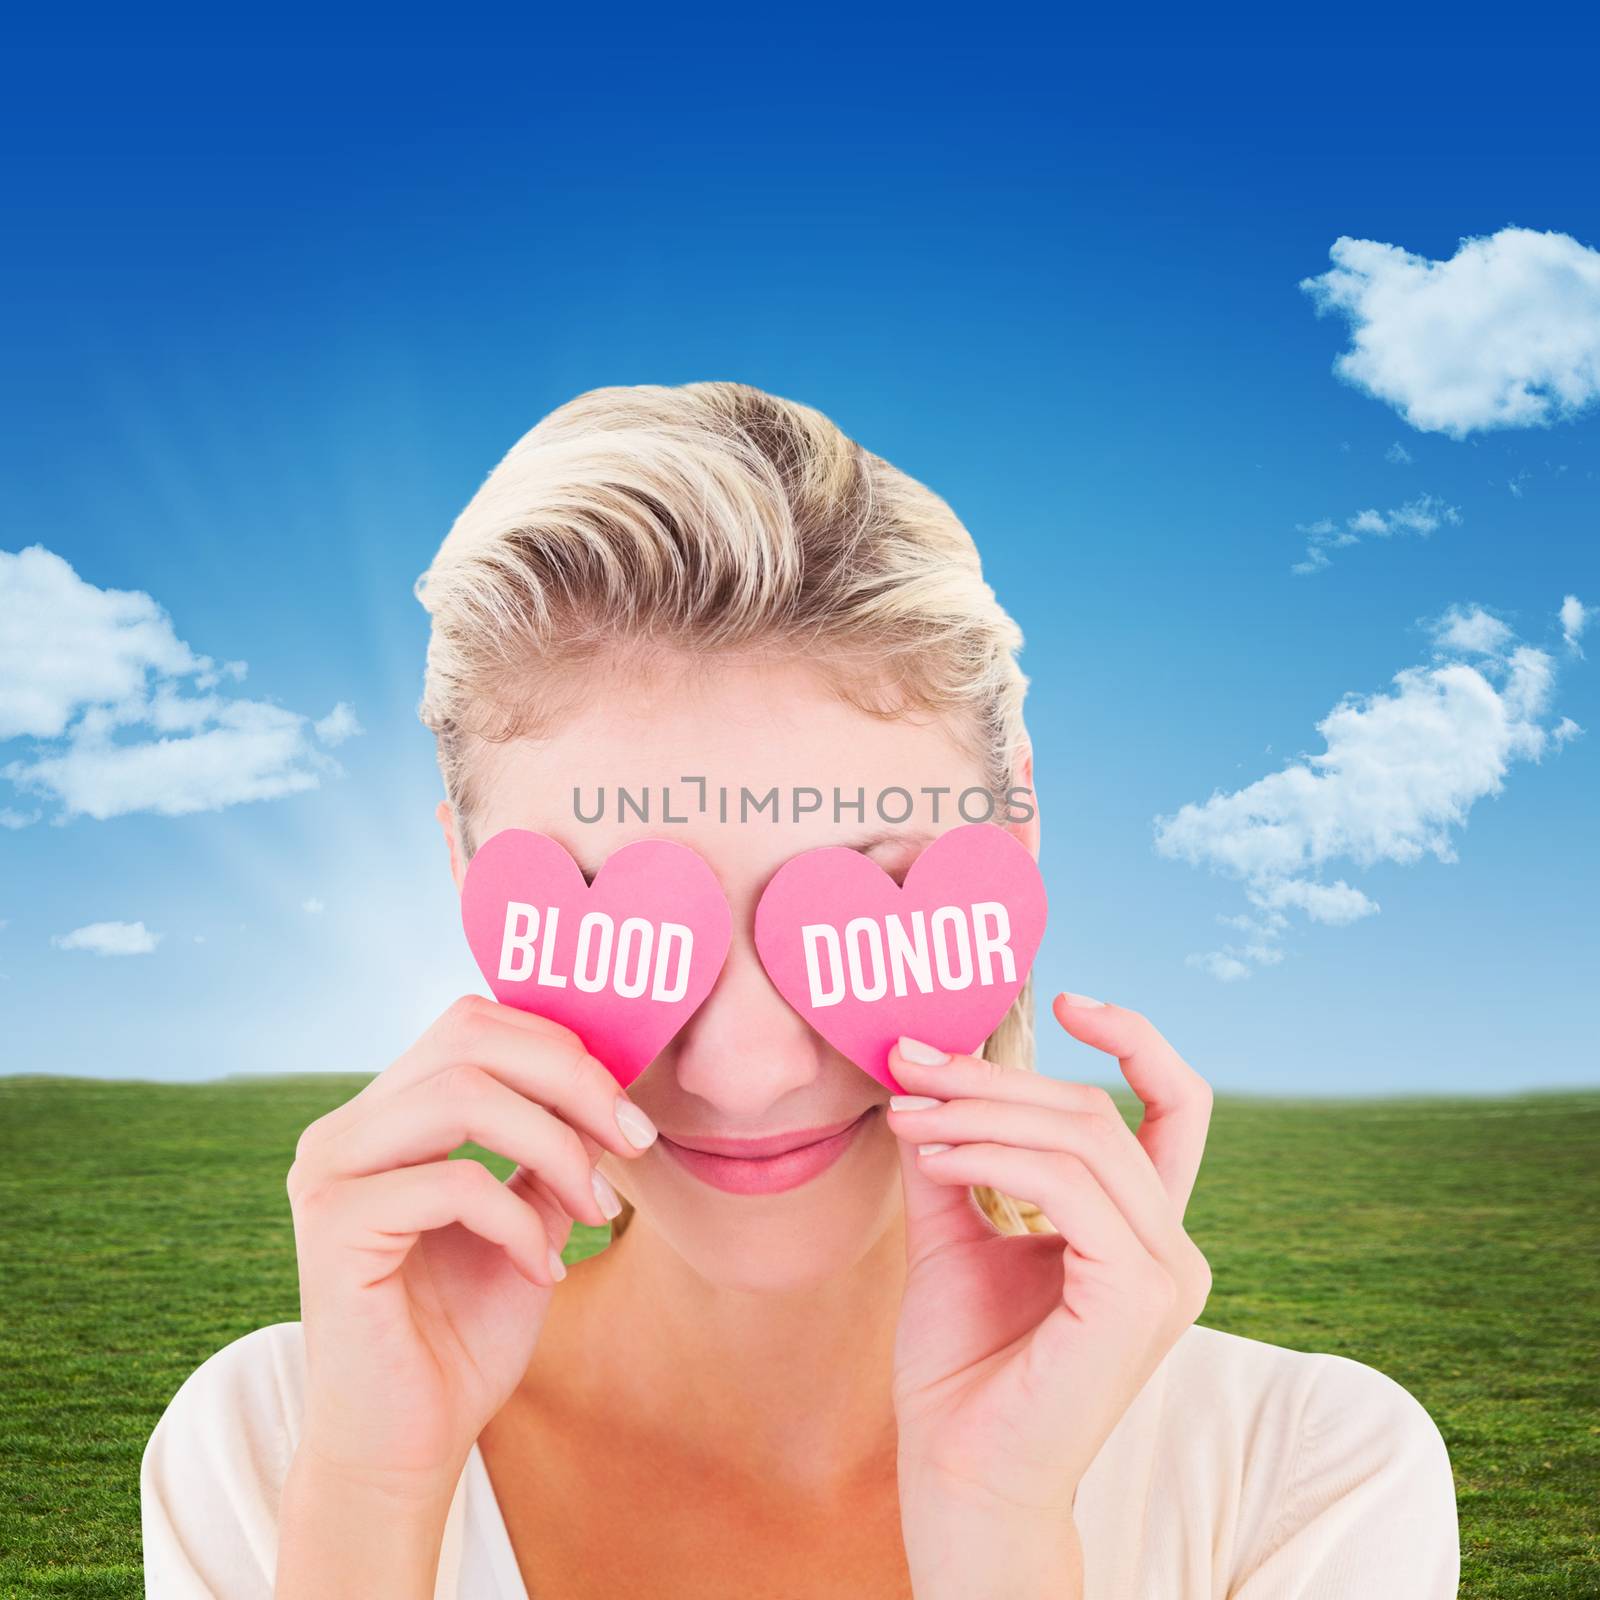 Attractive young blonde holding hearts over eyes against blue sky over green field